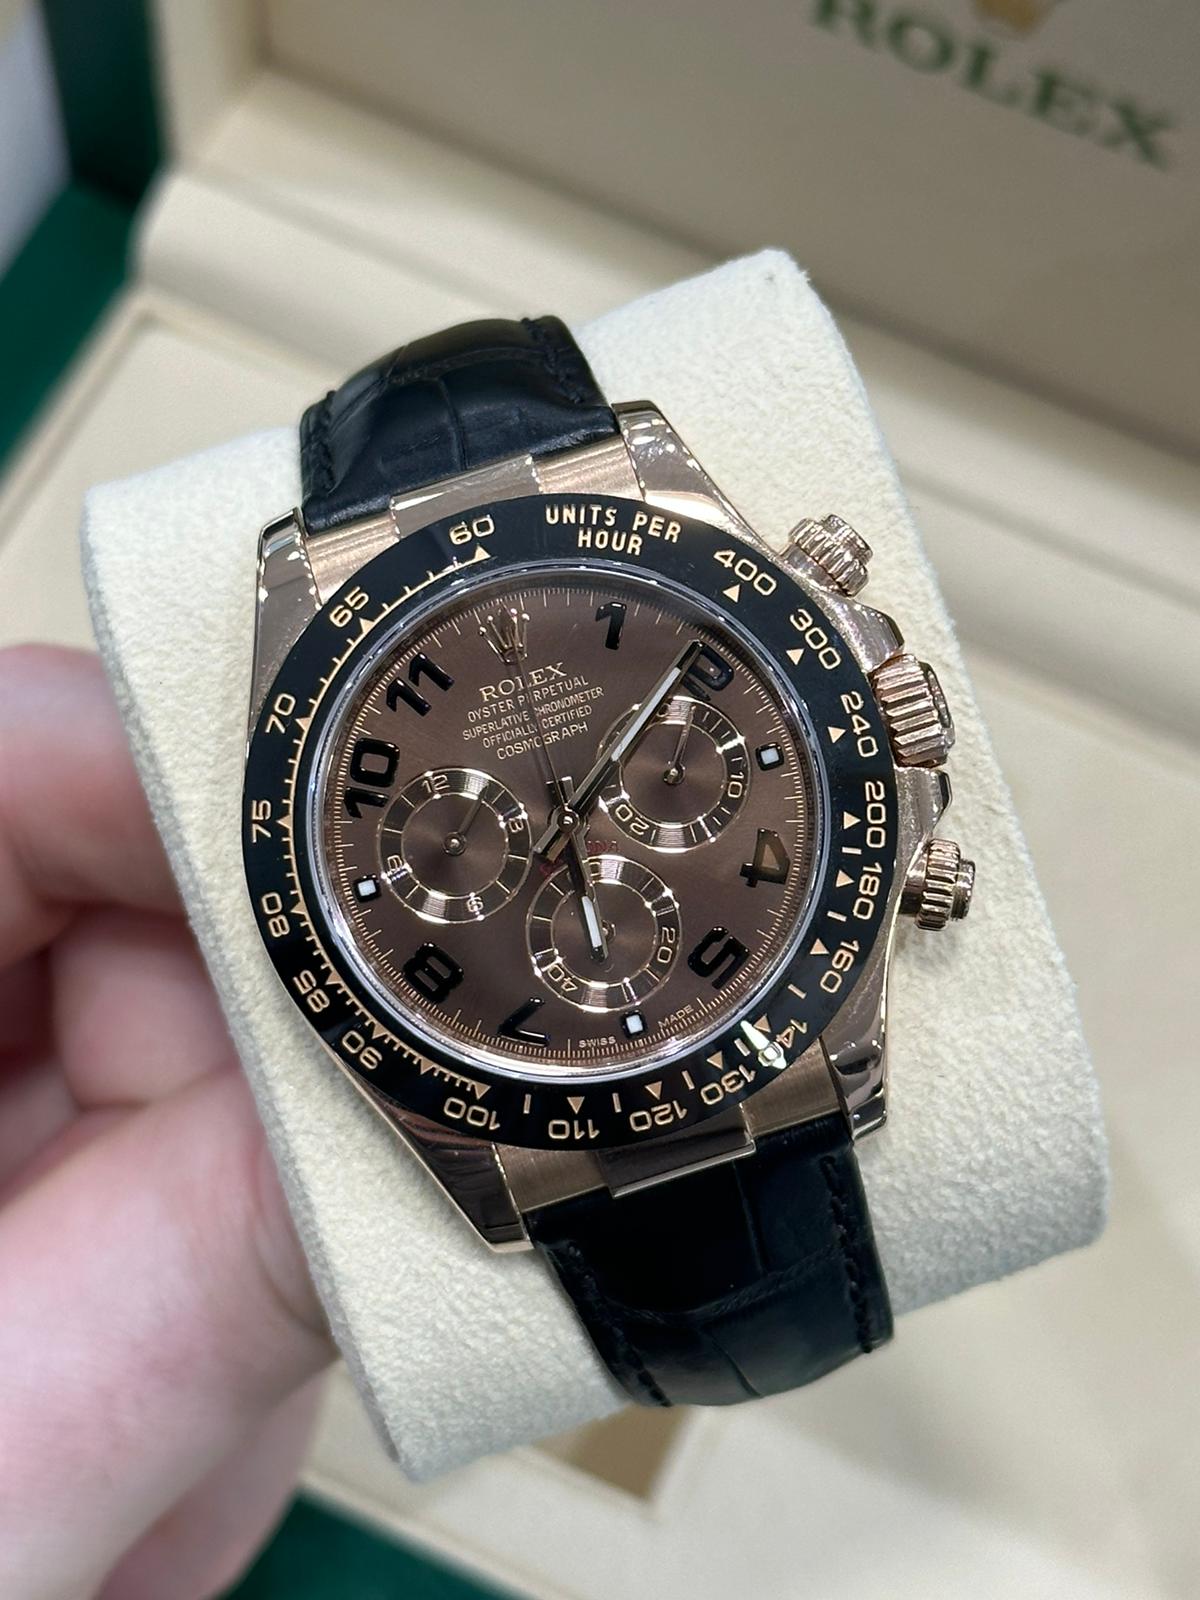 Rolex Daytona Chocolate with Leather bracelet 116515LN 2013 with box and papers. - Image 8 of 8